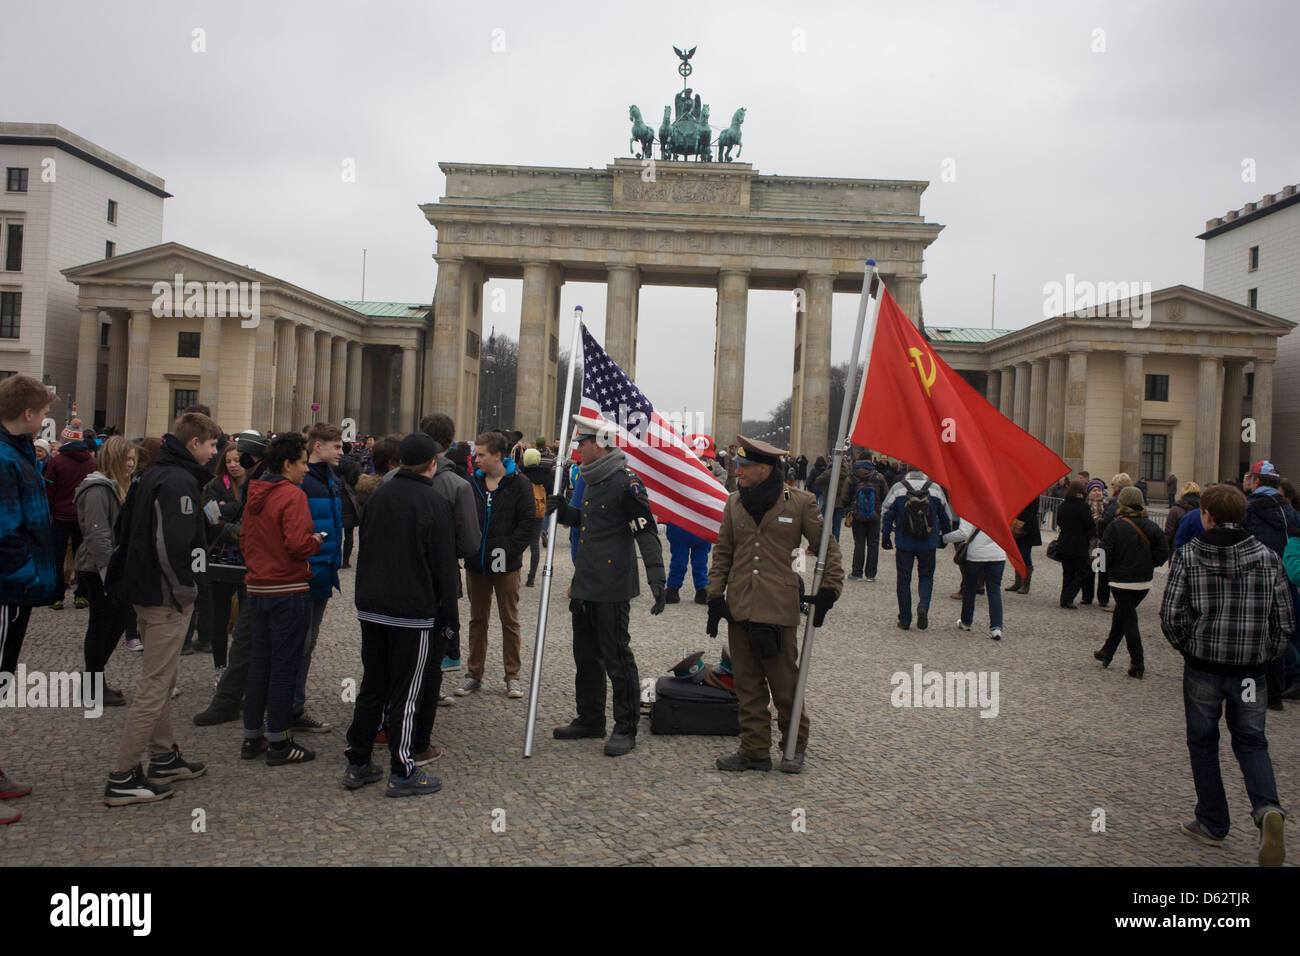 Actors in US and Soviet army uniforms hold flags to recount German history during the second world war and later, the cold war - beneath the Brandenburg Gate in Unter den Linden in central Berlin, Germany. Stock Photo